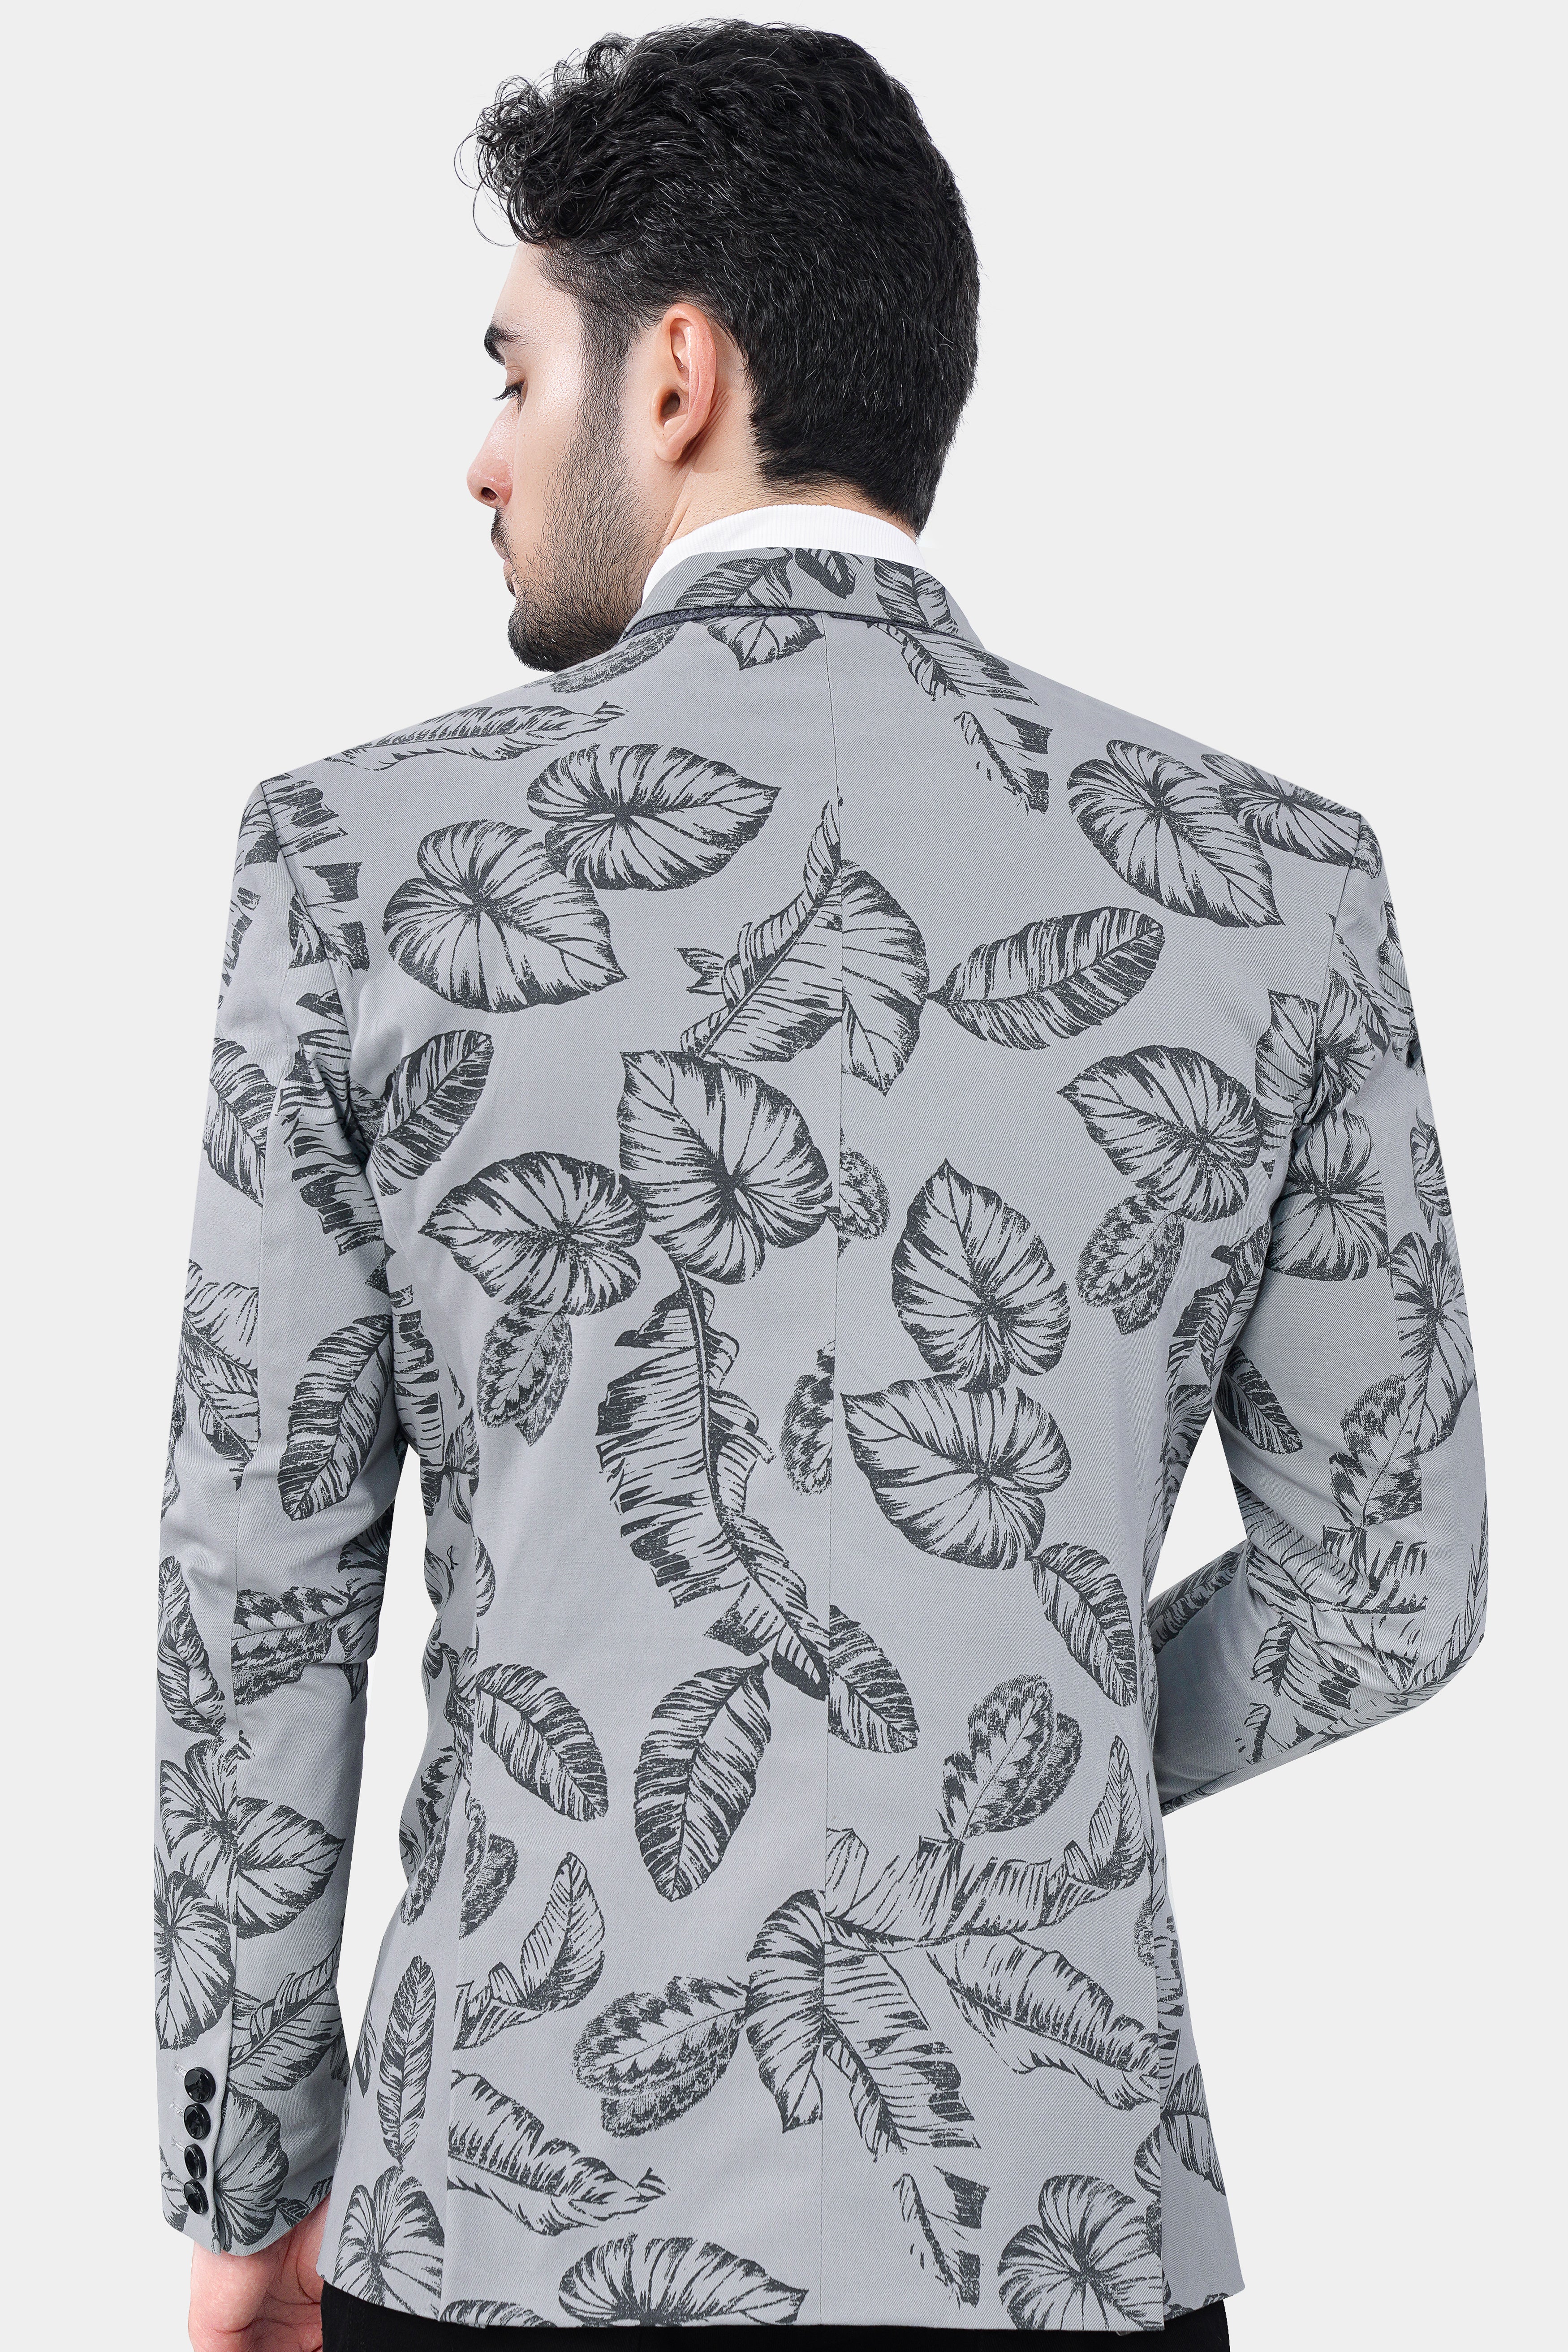 Gainsboro and Comet Gray Leaves Printed Premium Cotton Blazer BL3019-SB-36, BL3019-SB-38, BL3019-SB-40, BL3019-SB-42, BL3019-SB-44, BL3019-SB-46, BL3019-SB-48, BL3019-SB-50, BL3019-SB-52, BL3019-SB-54, BL3019-SB-56, BL3019-SB-58, BL3019-SB-60